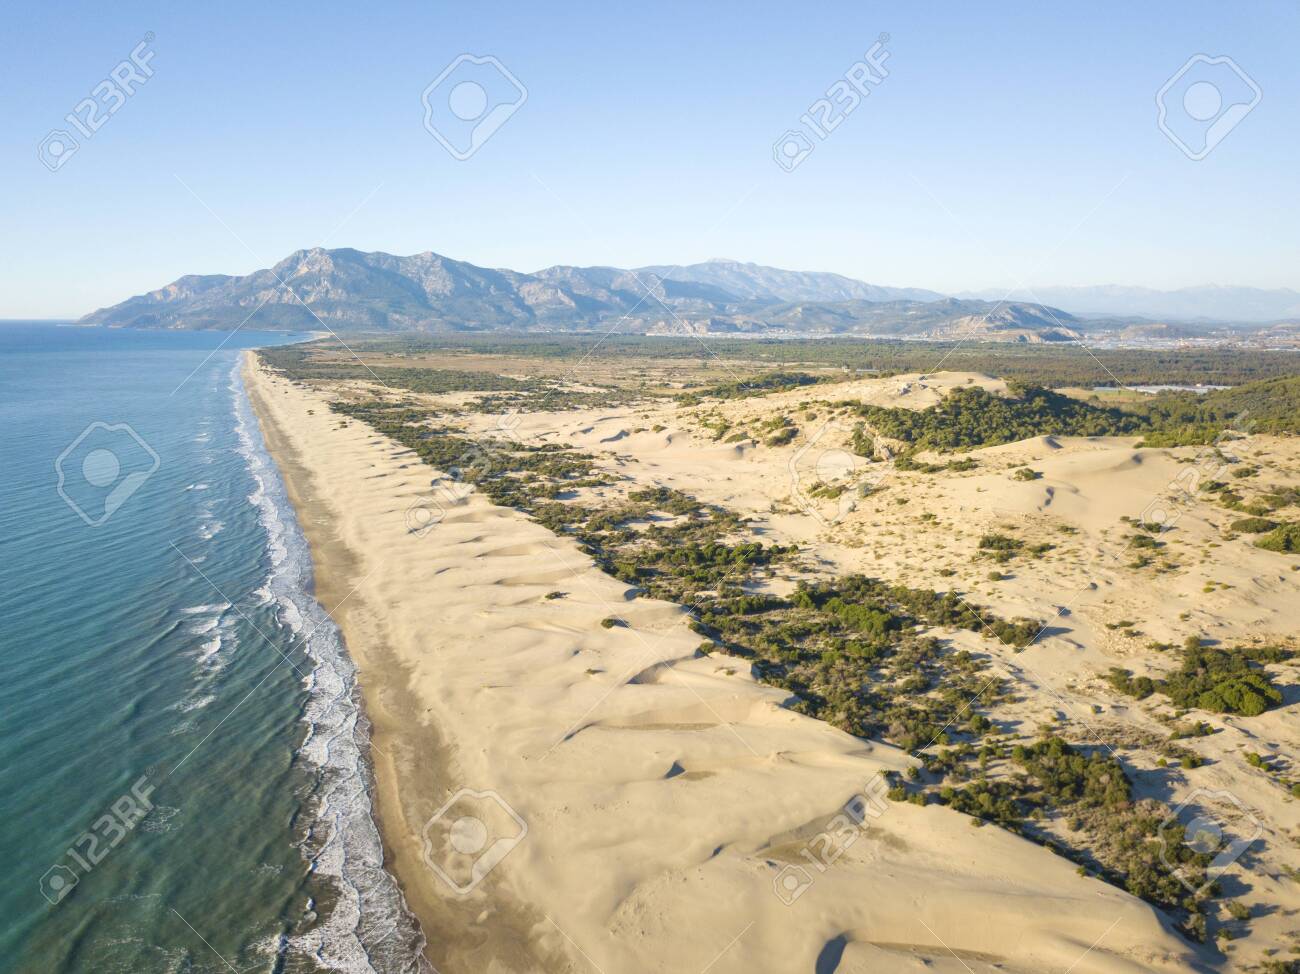 Aerial Drone Of Sand Dunes And Sea Coast With Mountain